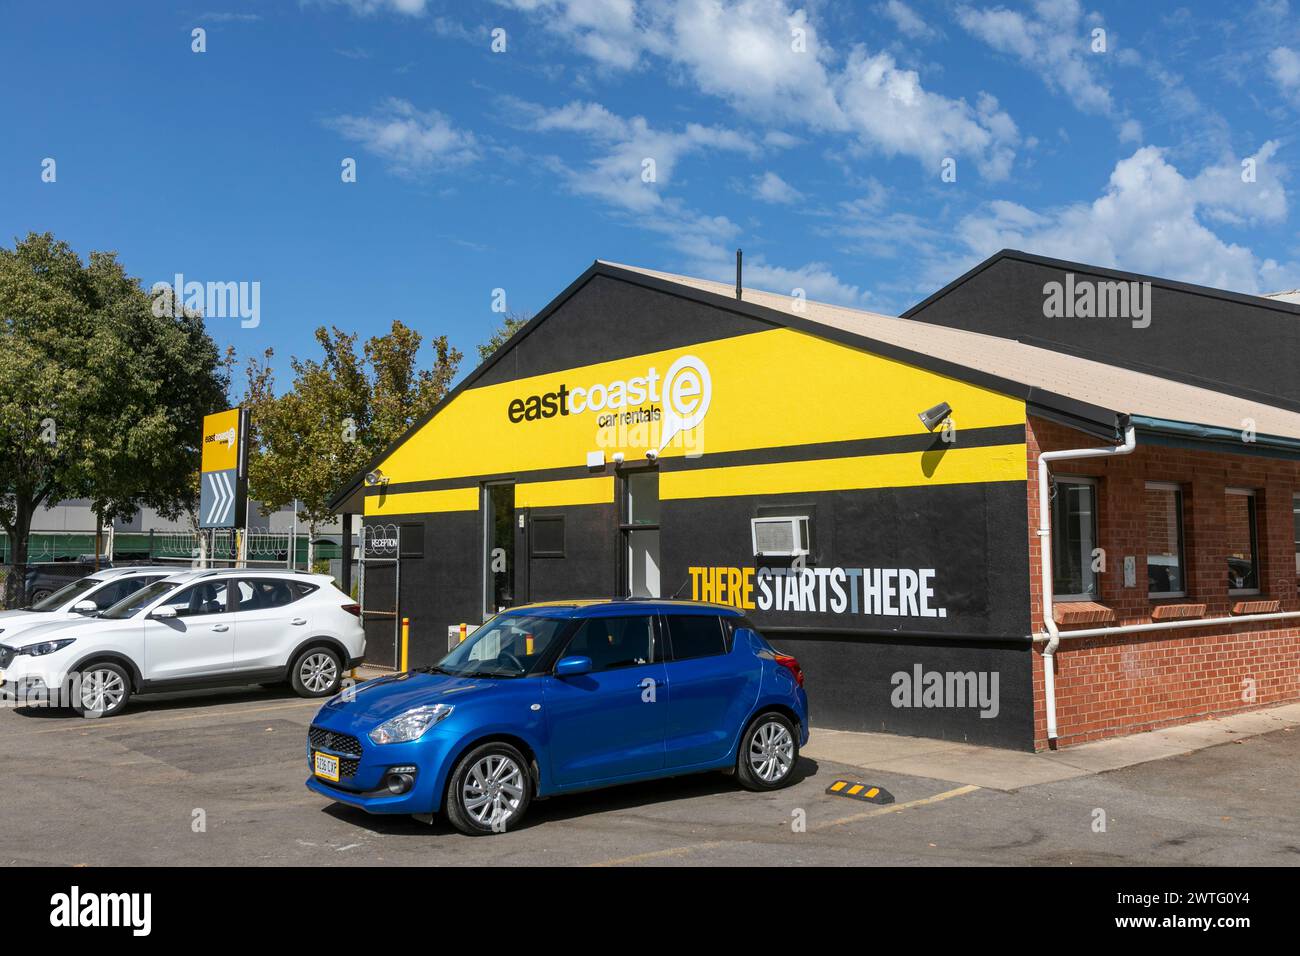 Adelaide, South Australia, east coast car rentals business offering car hire for travellers, including Chinese MG cars Stock Photo